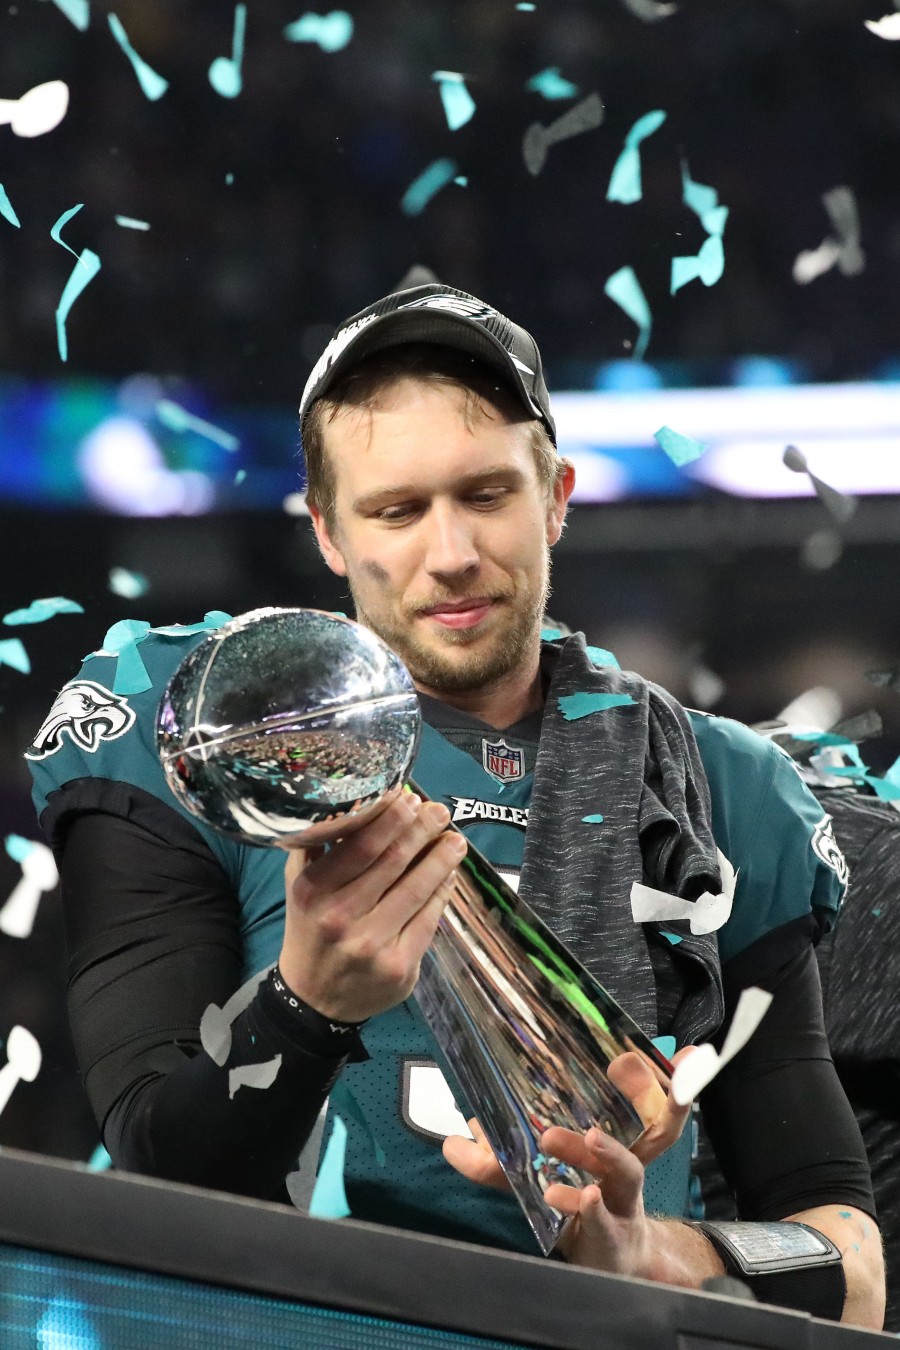 Details On Nick Foles' New Contract With Eagles